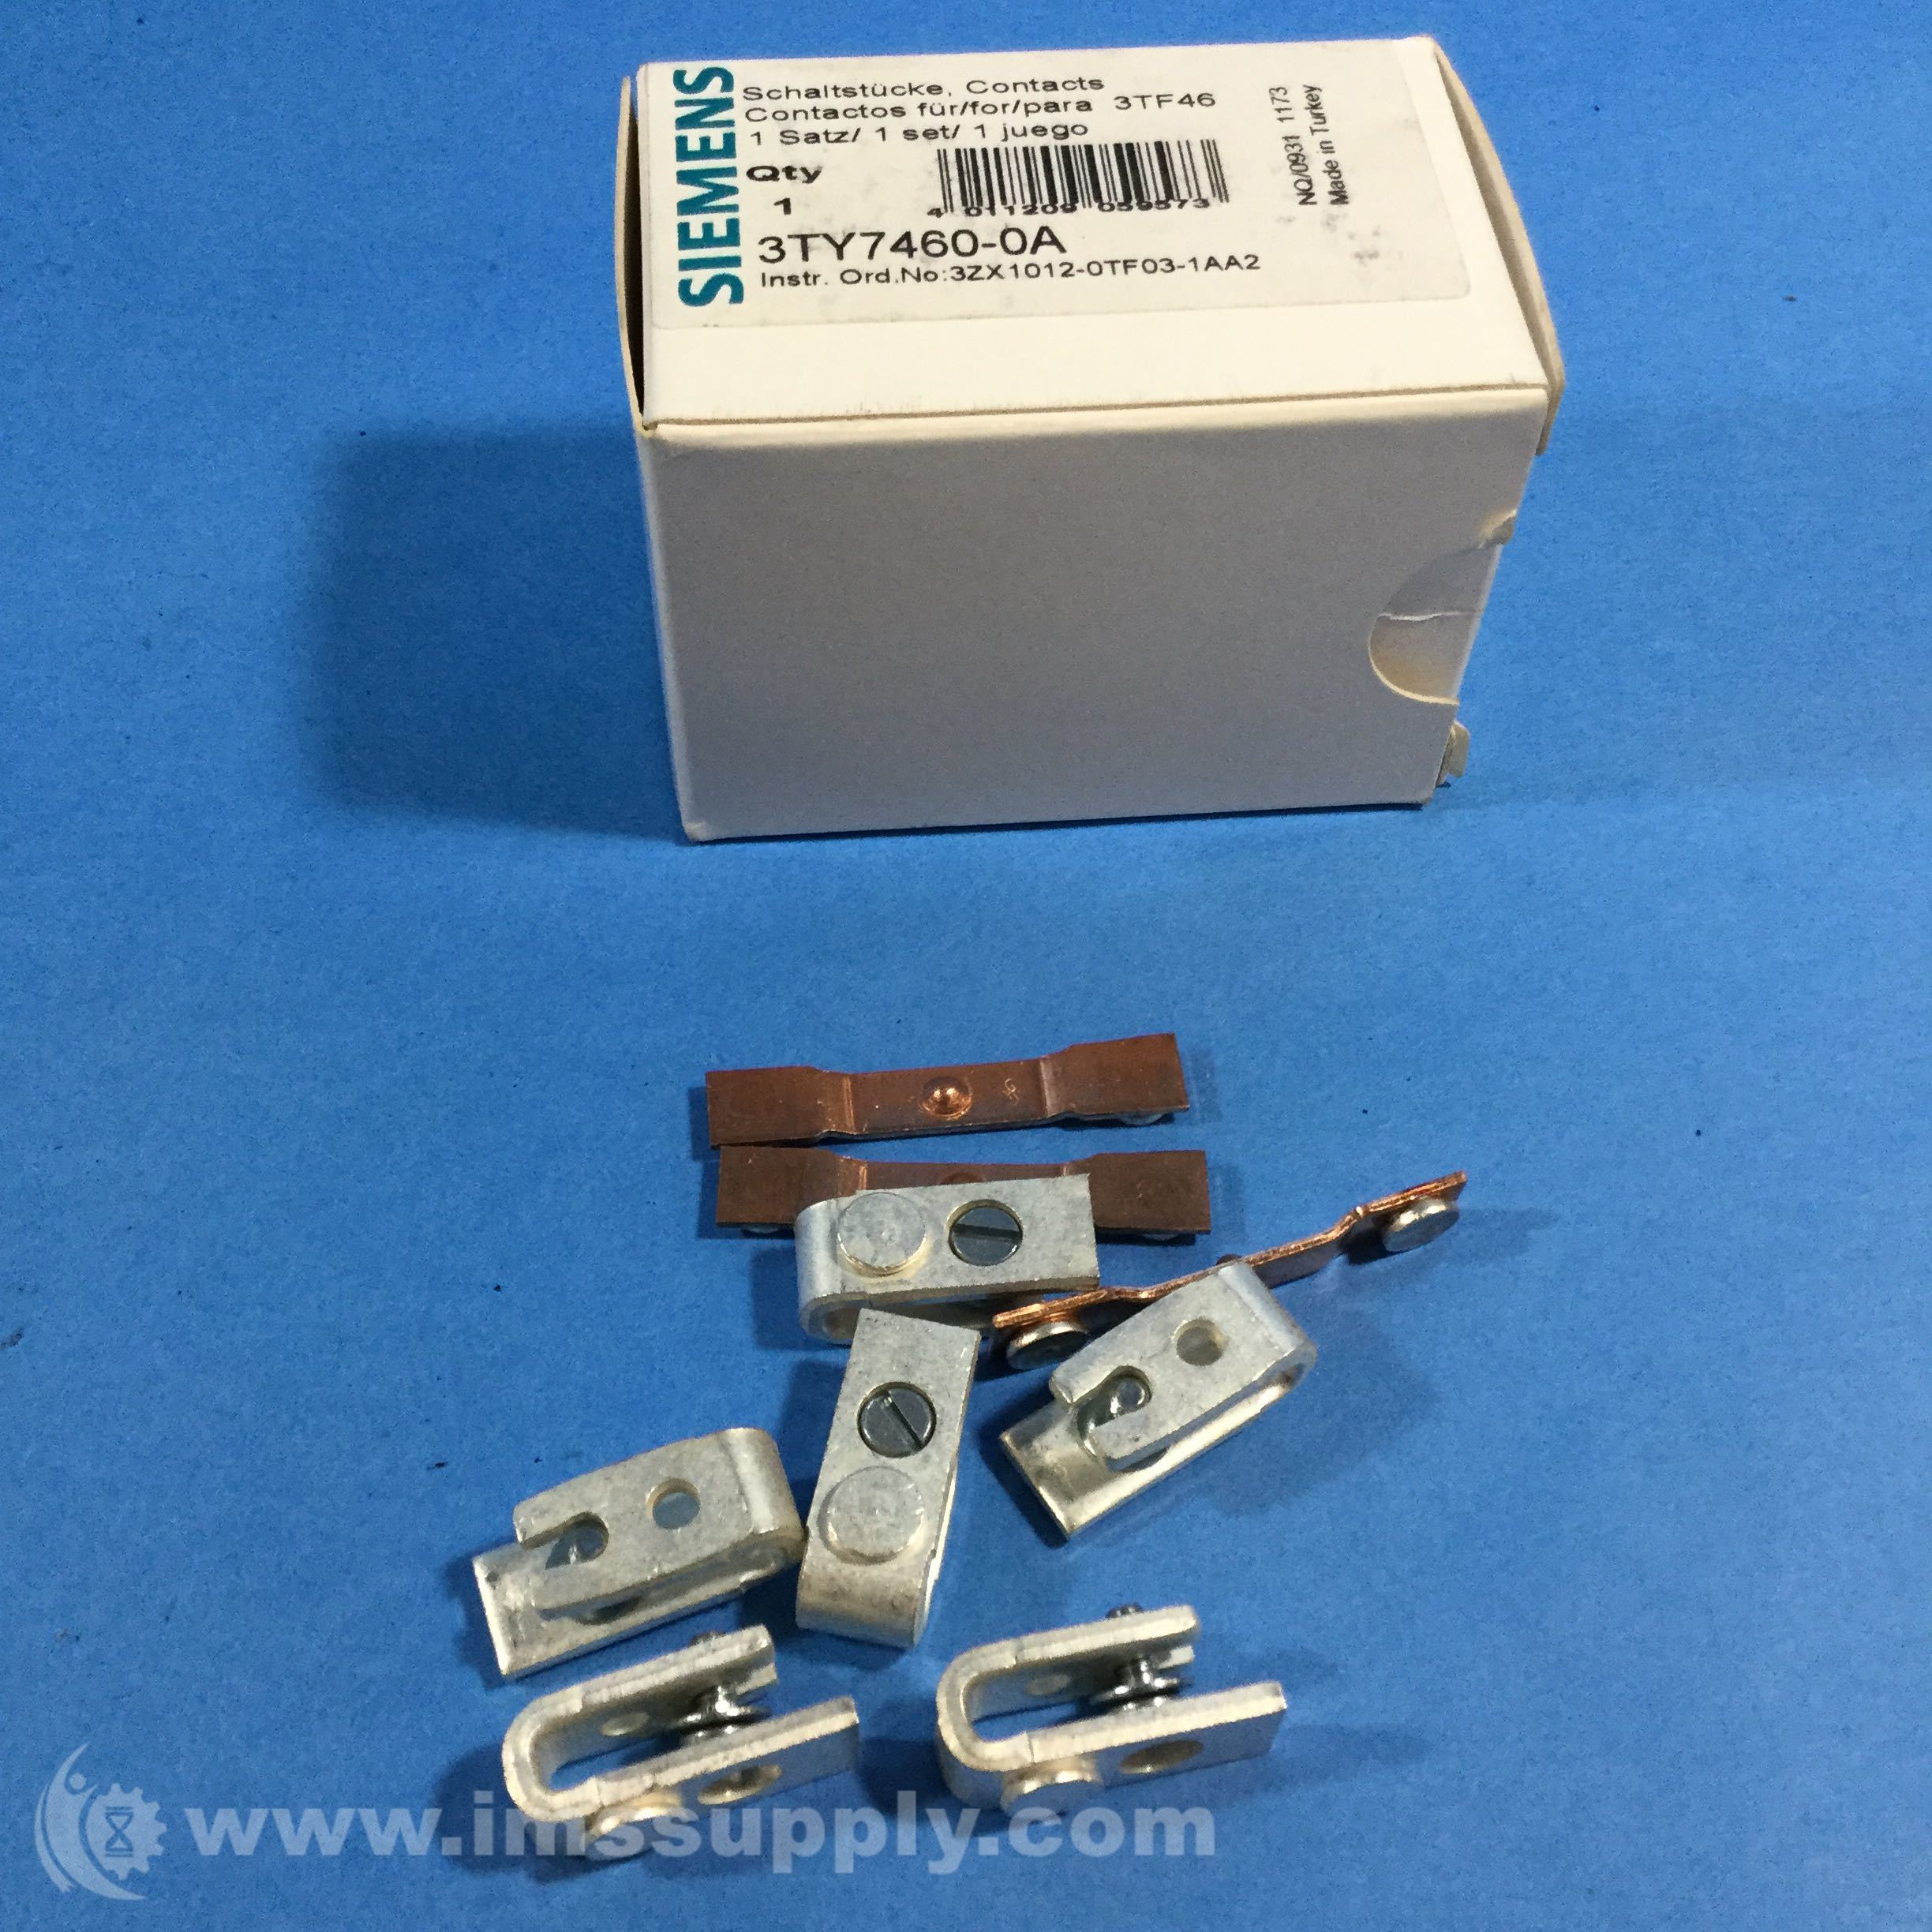 3TY7460-OA 3TF Main Contact 3P   3TY7460-0A  Fit for  Siemens  3TF46 3TY7460 